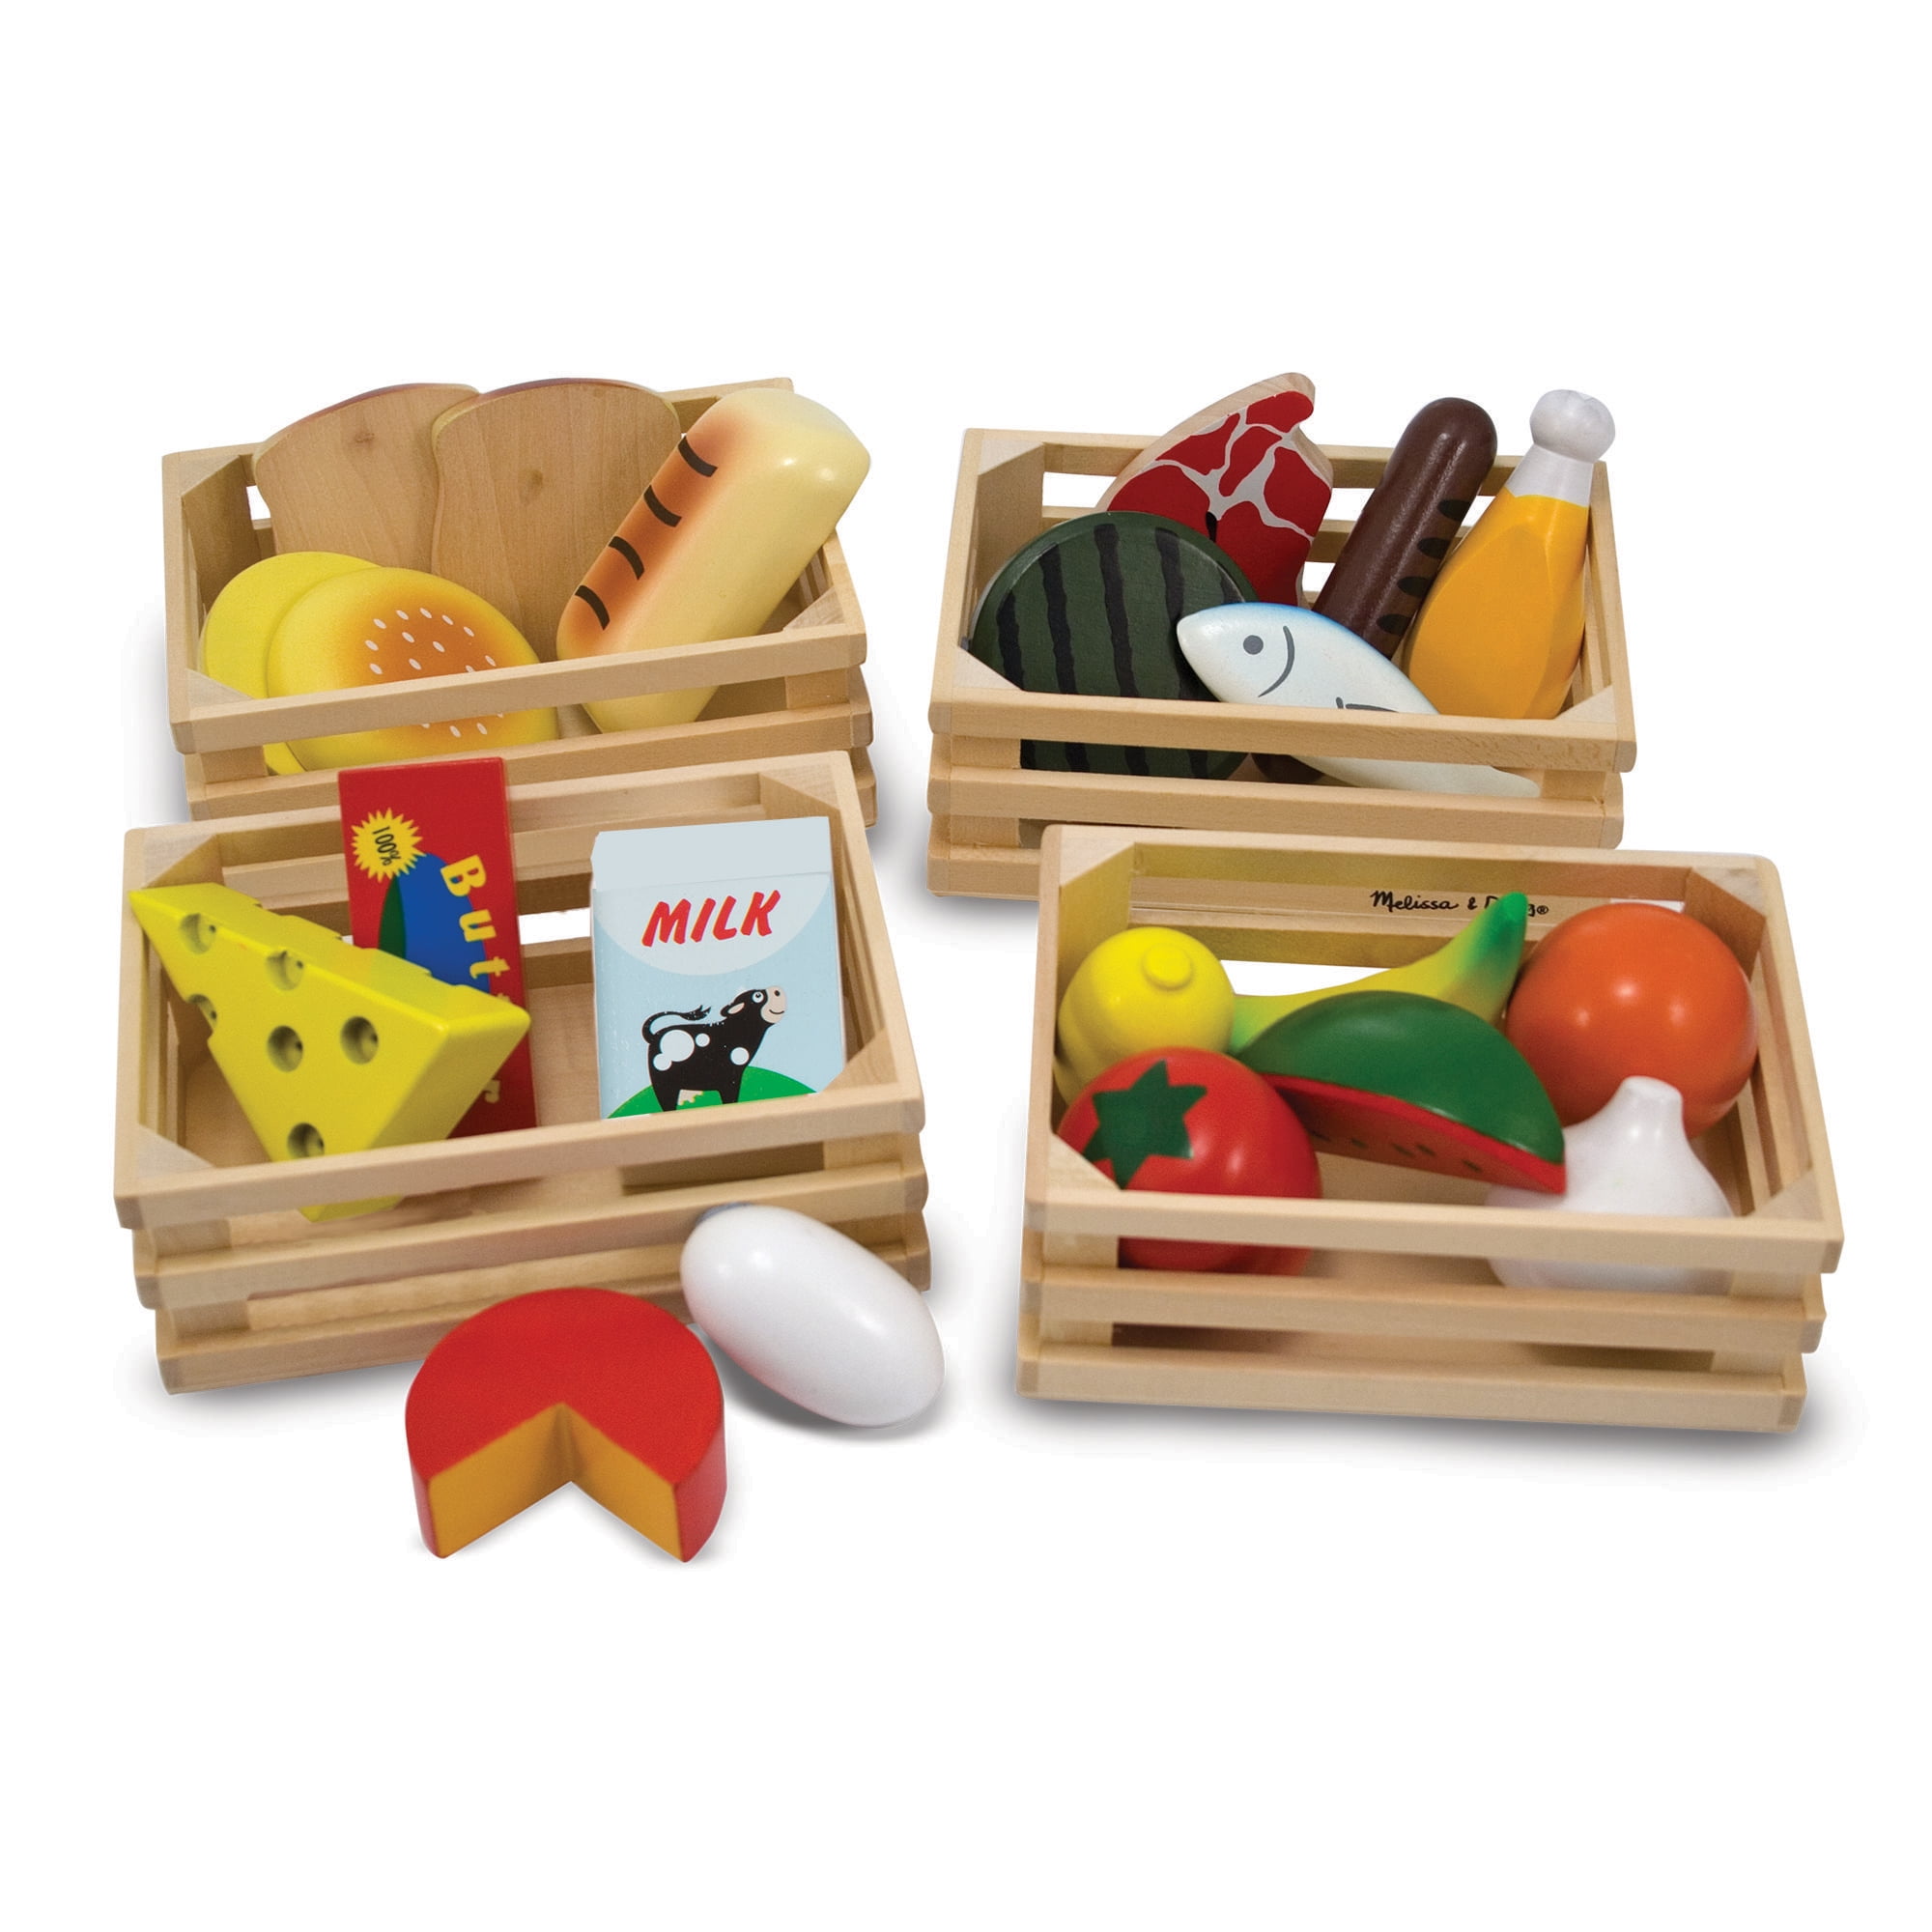 Melissa And Doug Food Groups 21 Hand Painted Wooden Pieces And 4 Crates